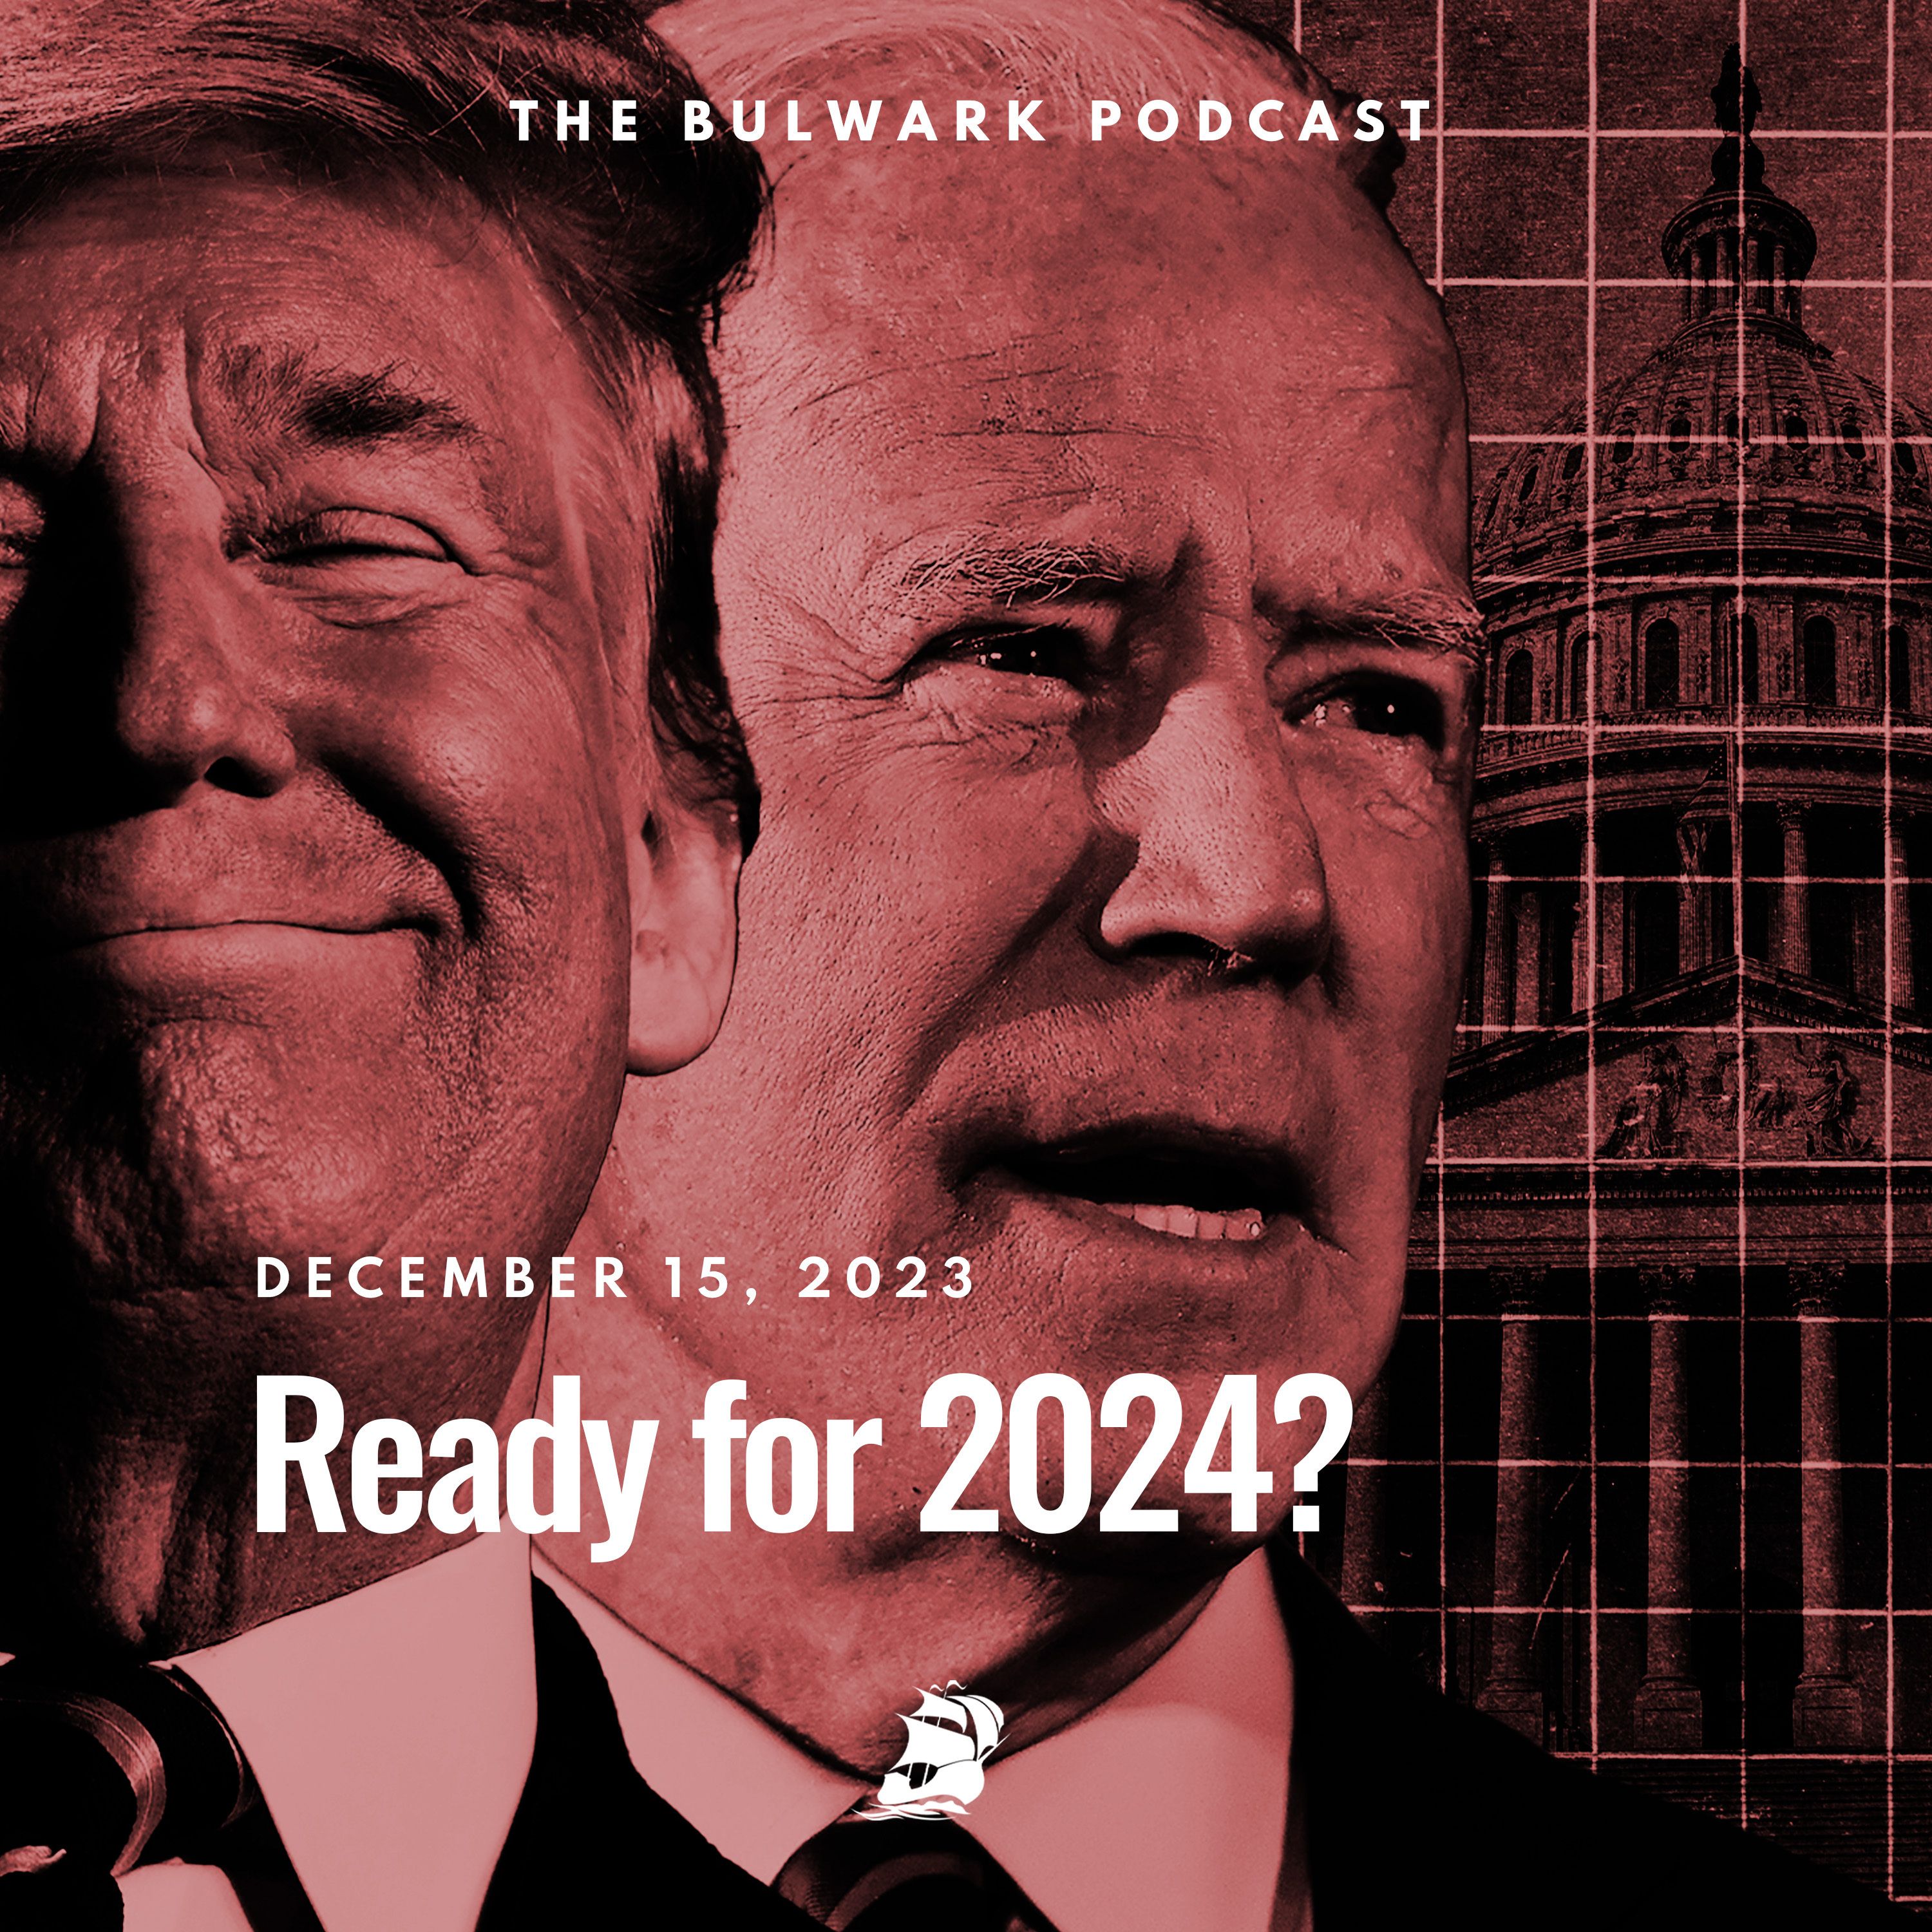 Ready for 2024? by The Bulwark Podcast